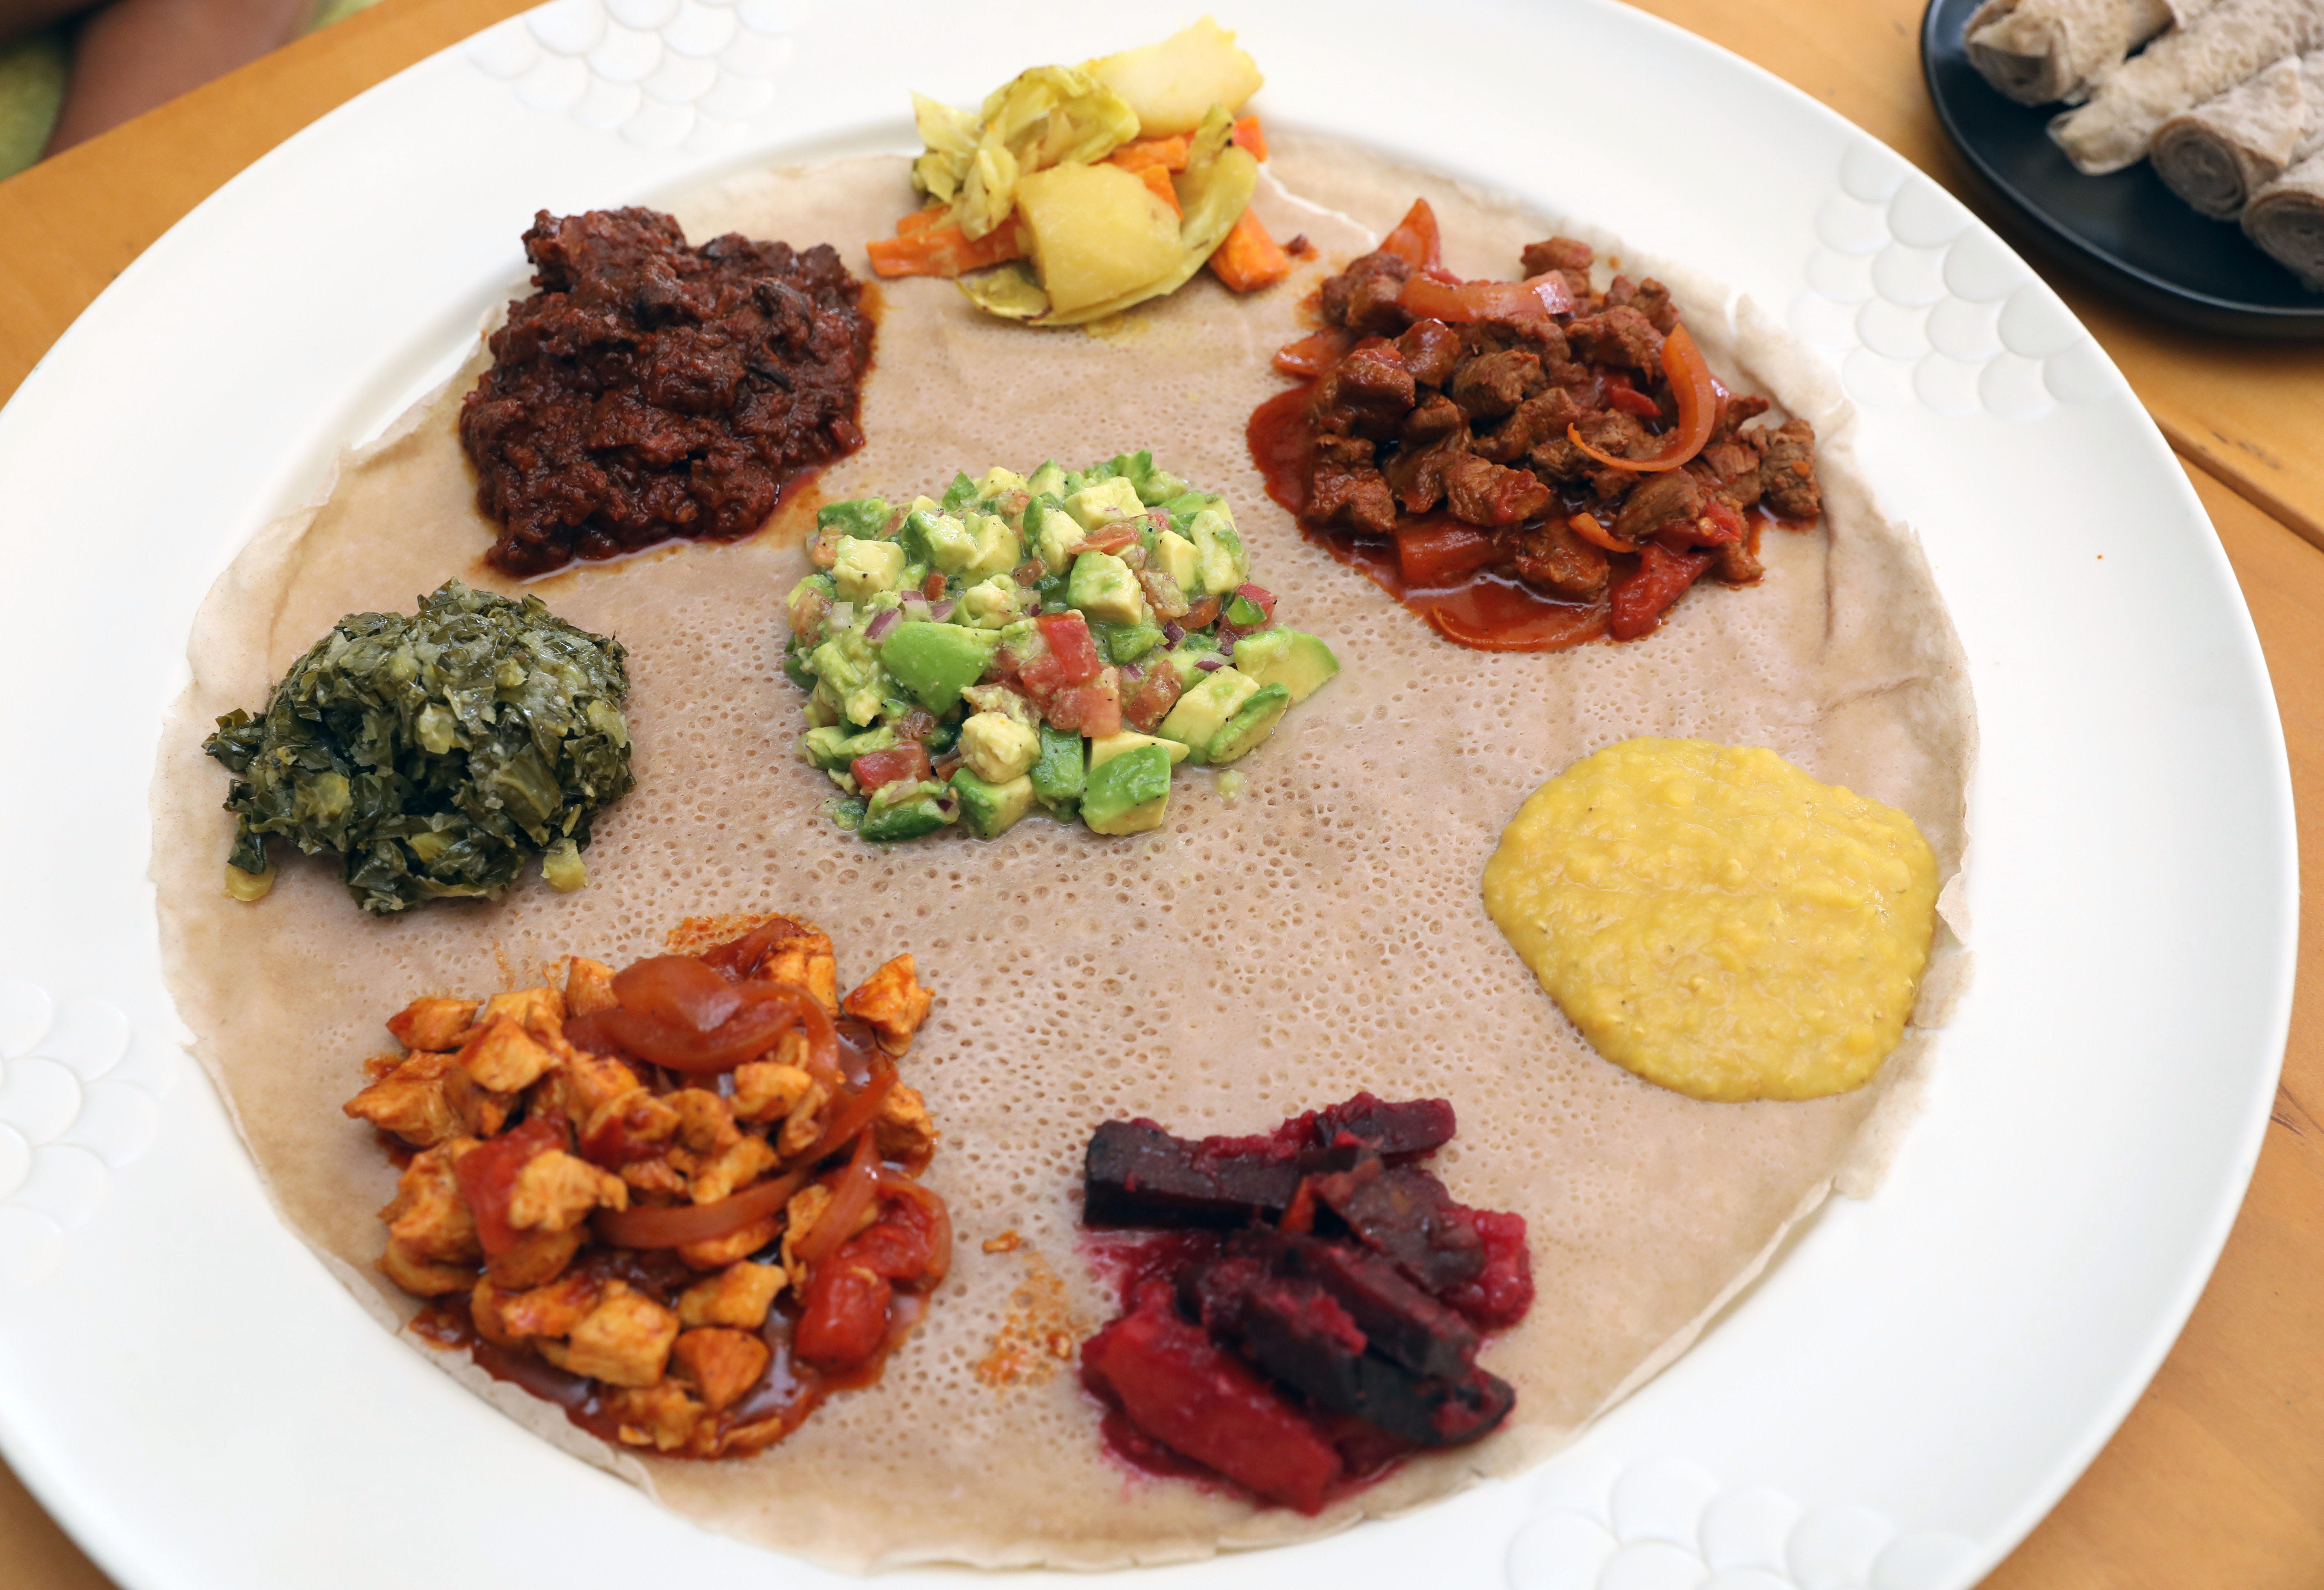 Ethiopian food is served on Injera, a kind of flatbread pancake. Here is a sampling of food from Lalibela Ethiopian Cuisine Restaurant in Mount Kisco, New York. Clockwise from bottom left, doro tibs (chicken); gomen (collard greens); siga wat (slow cooked beef); cabbage; lamb tibs; misir wat alicha (non-spicy split lentils); beets and carrots, and in the center, avocado salad.